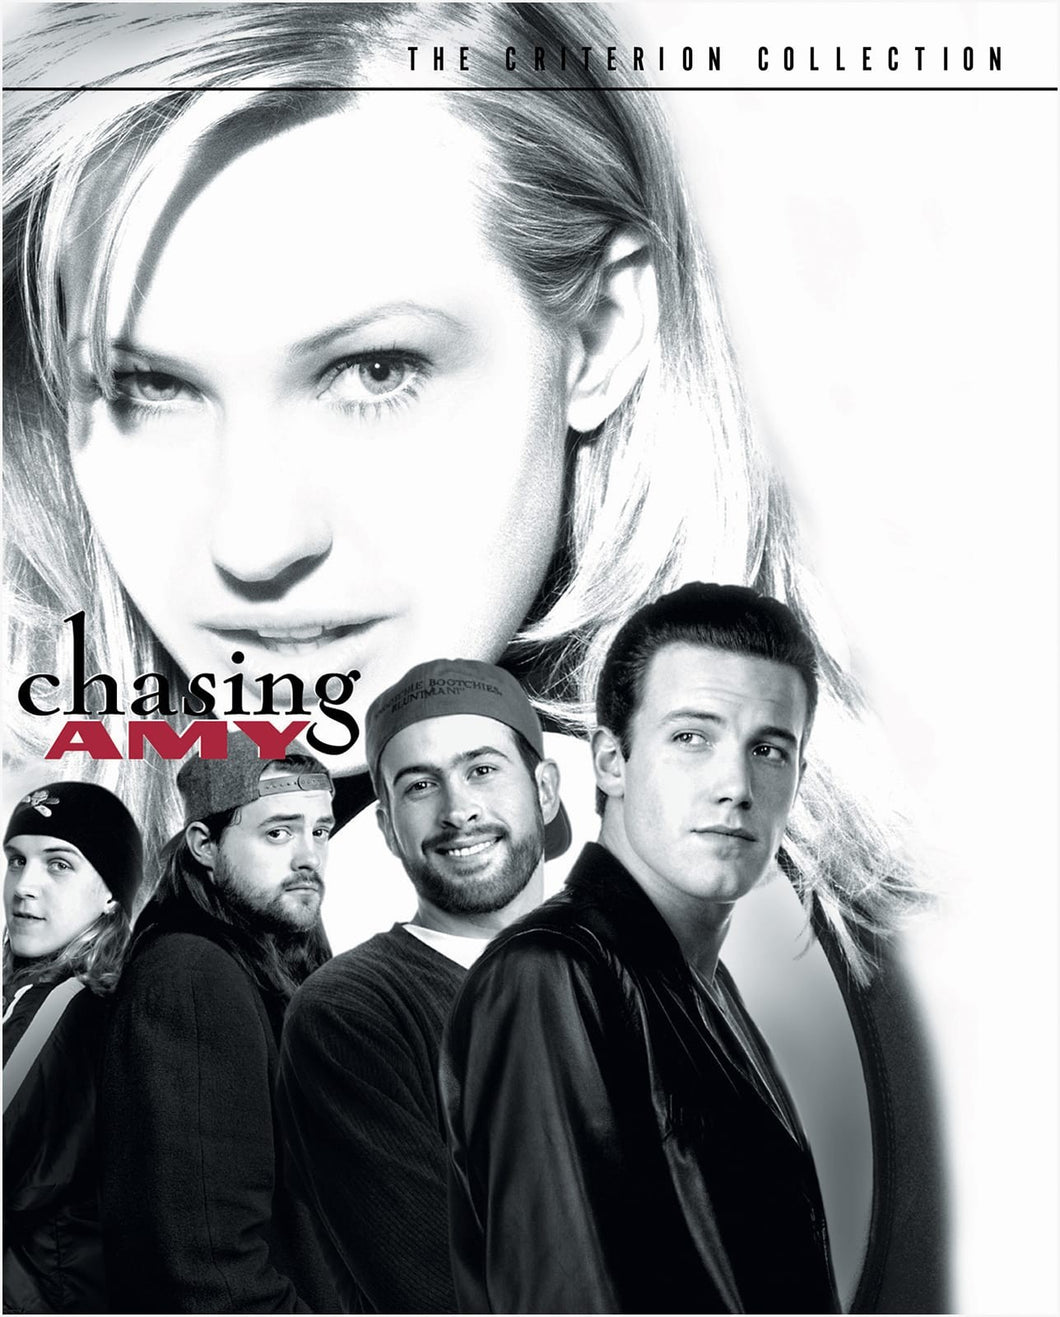 Chasing Amy (1997) Criterion Collection #75